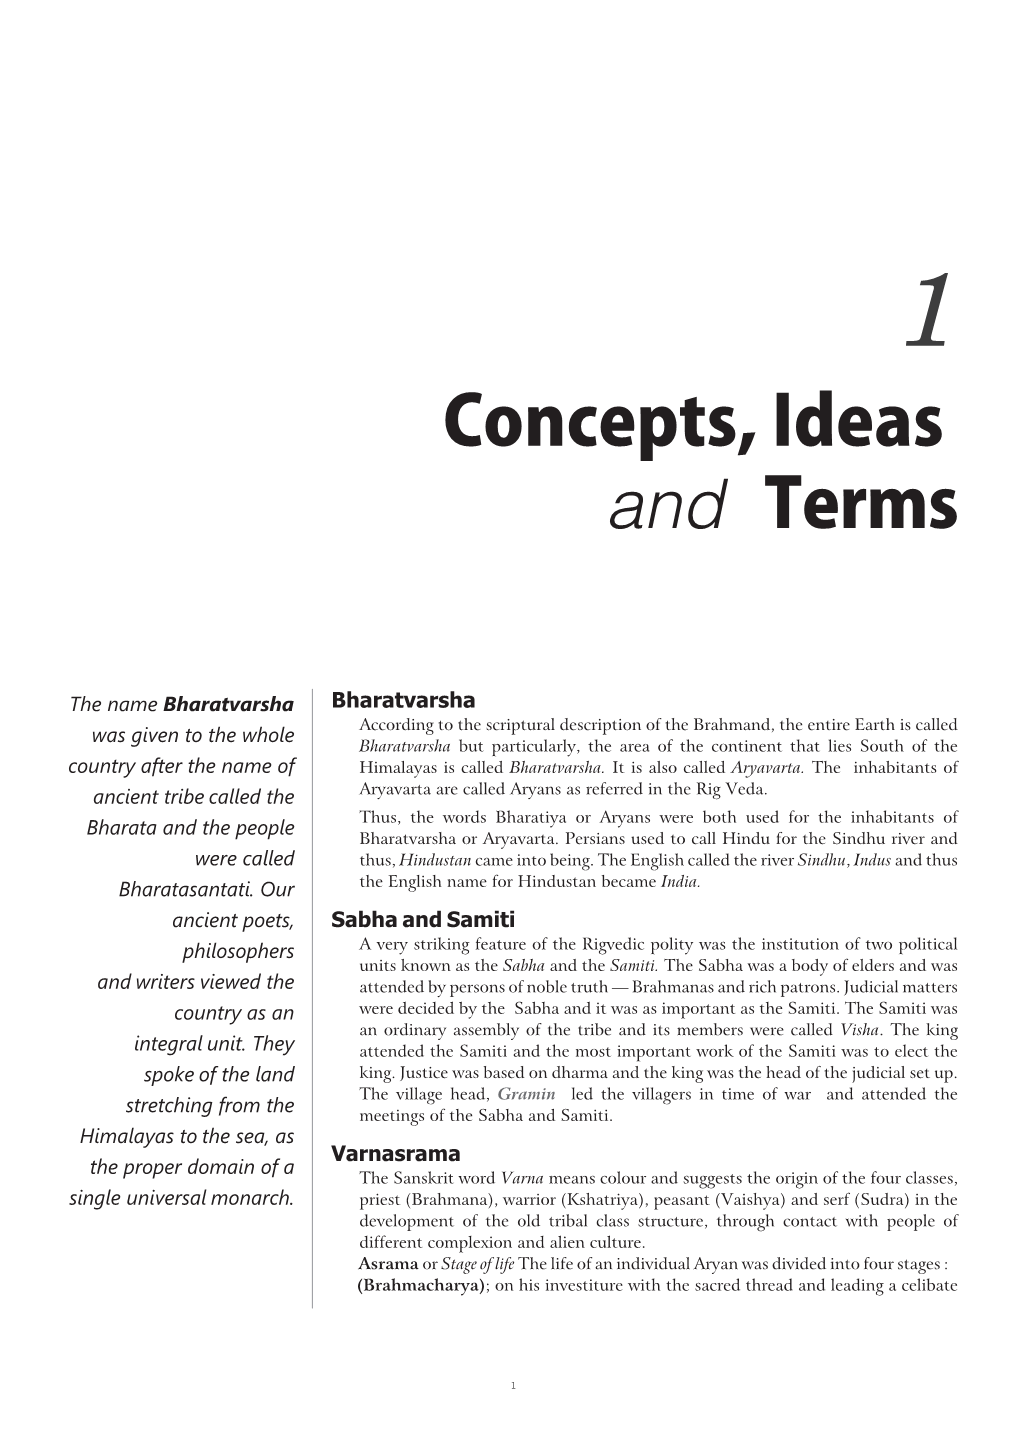 Concepts, Ideas and Terms